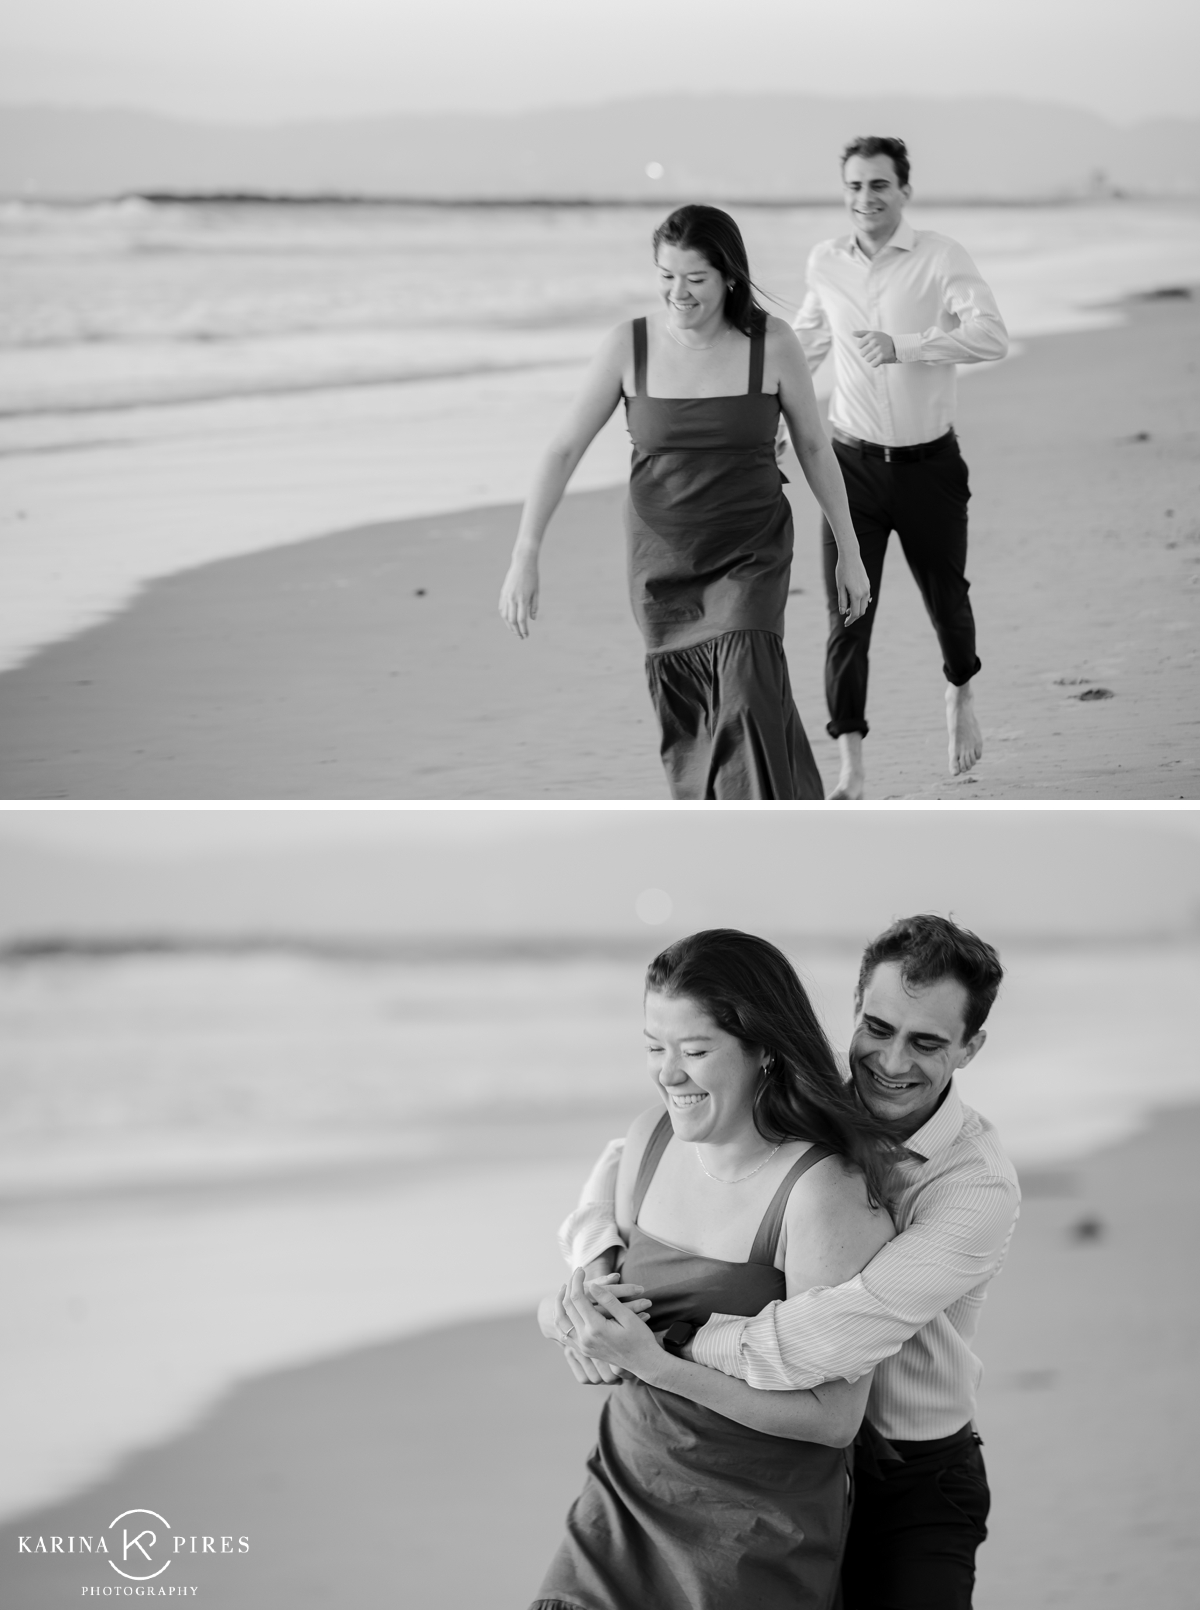 Proposal planning tips from a Los Angeles photographer